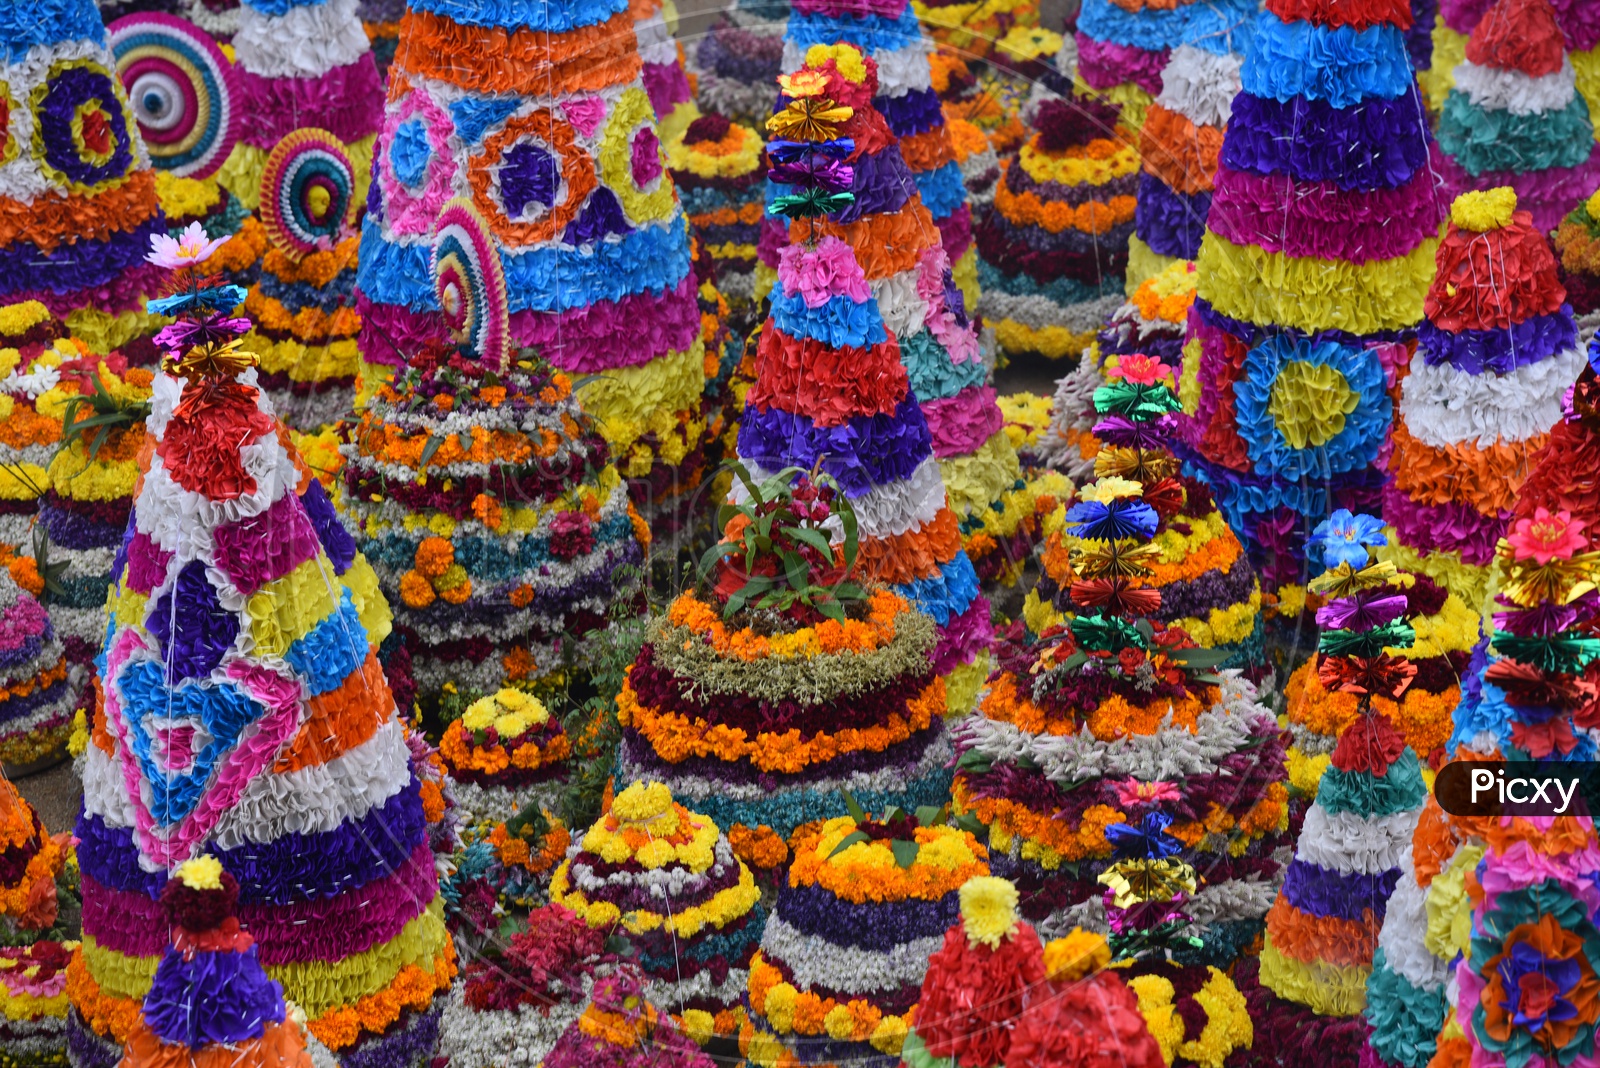 Bathukamma, a floral decoration made from medicinal flowers and fragrances arranged like a temple gopuram.